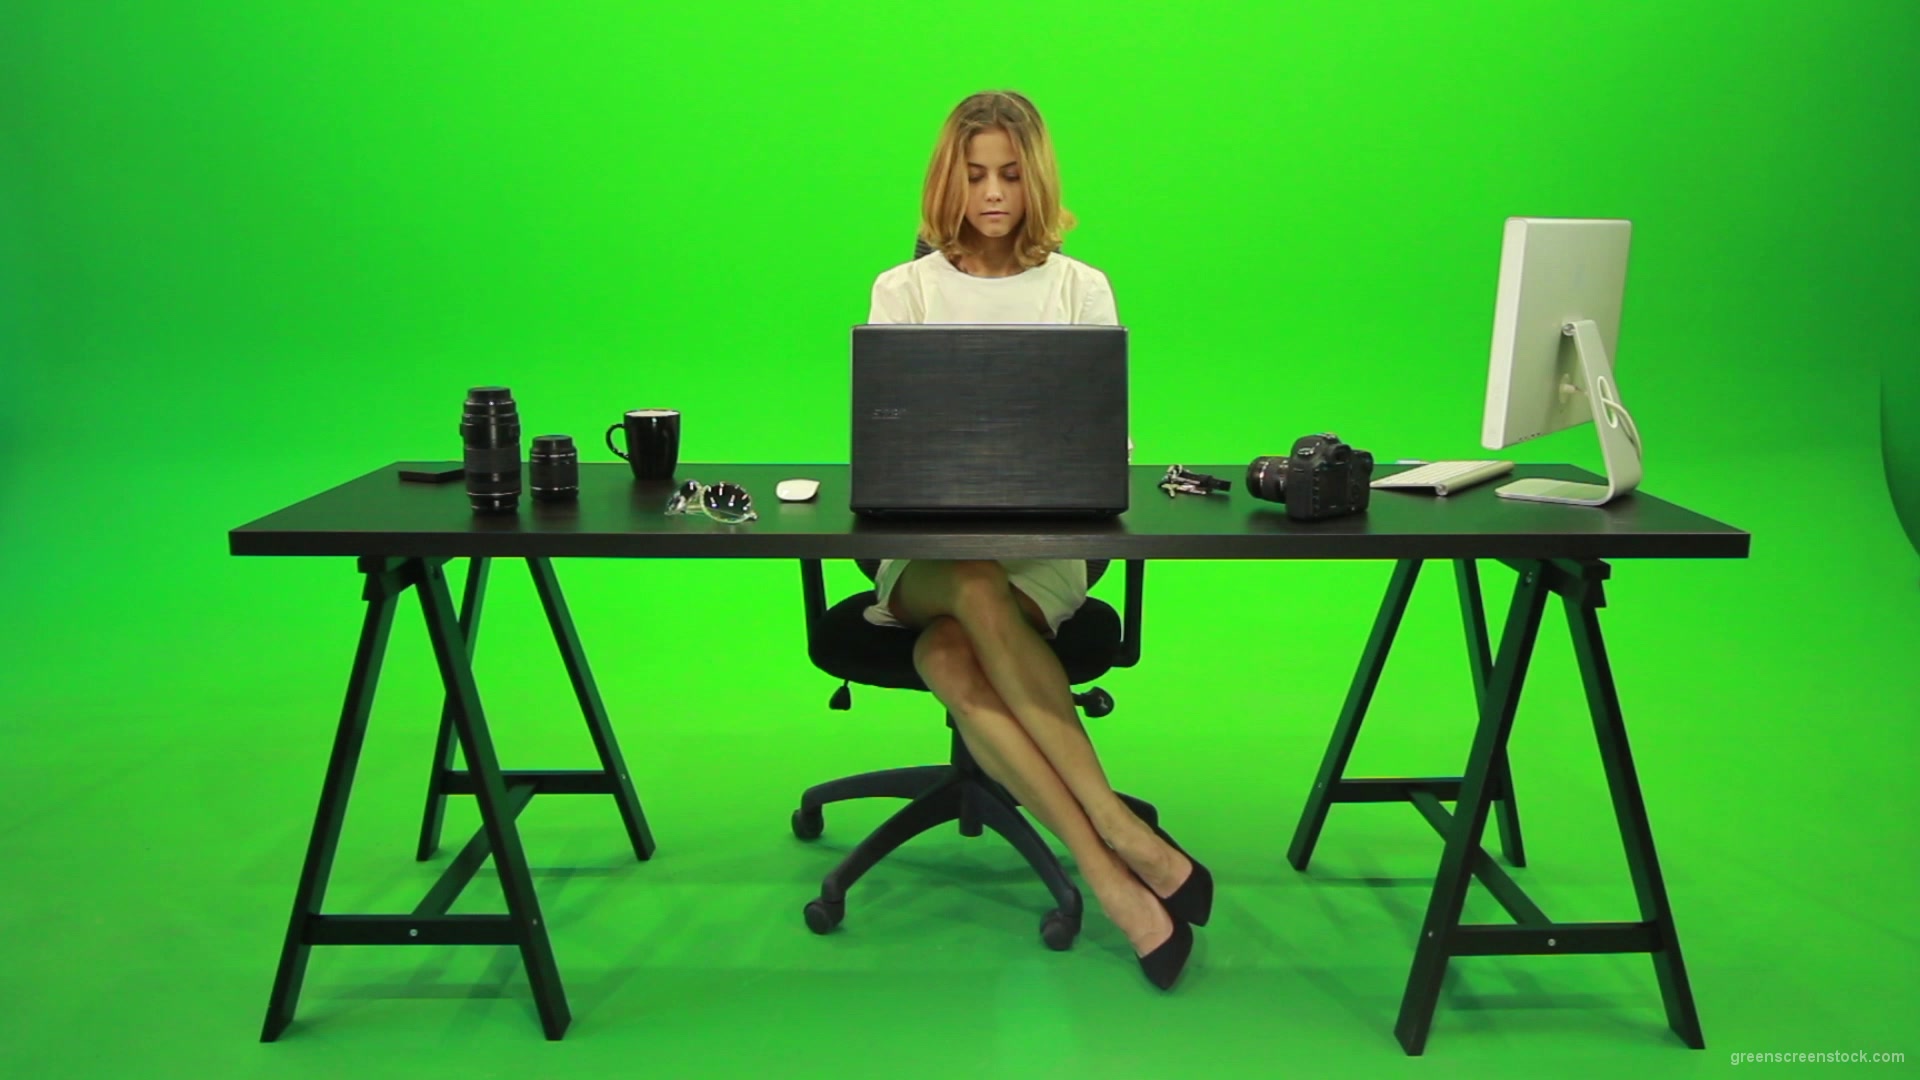 Business-Woman-Working-in-the-Office-2-Green-Screen-Footage_007 Green Screen Stock